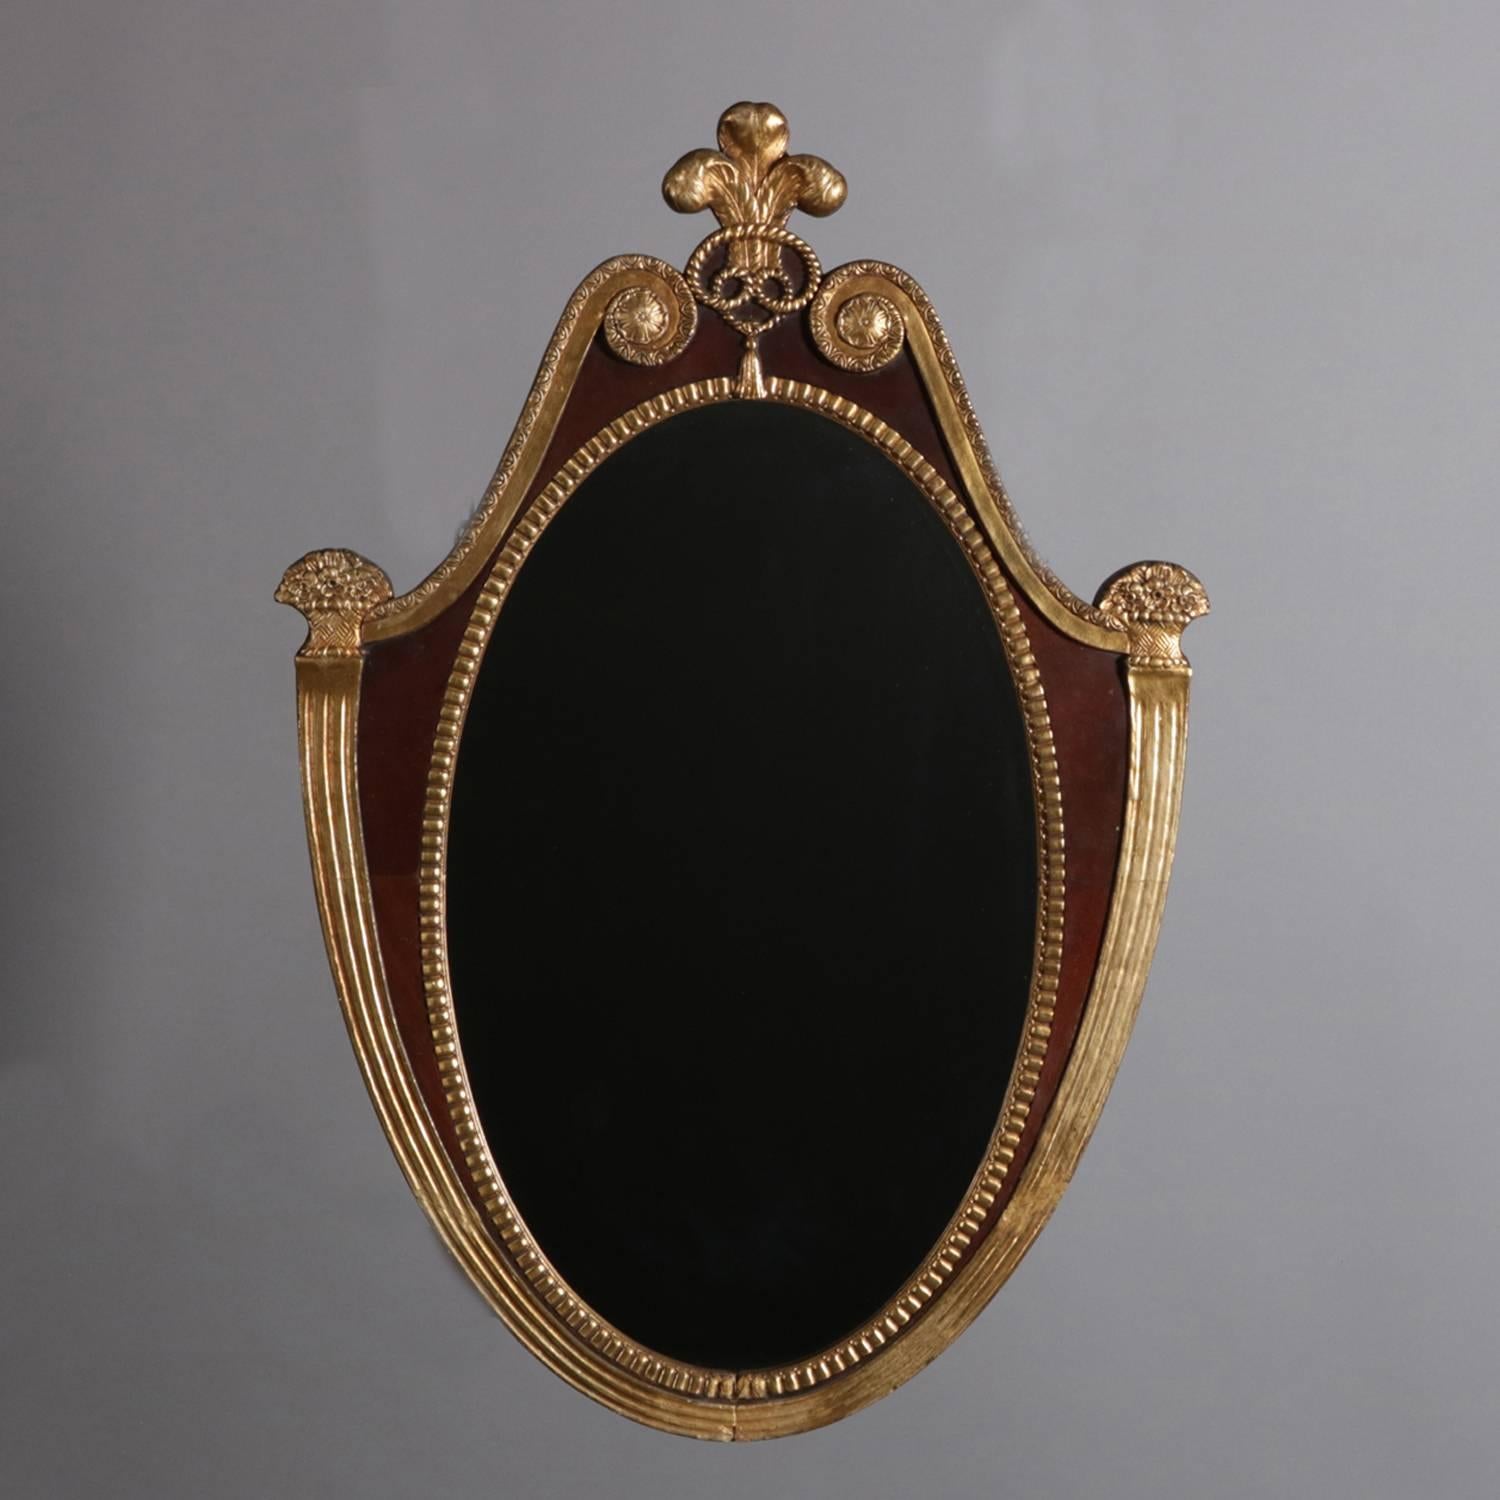 Carved French Parcel Gilt Mahogany Federal Style Shield Form Wall Mirror, 20th Century